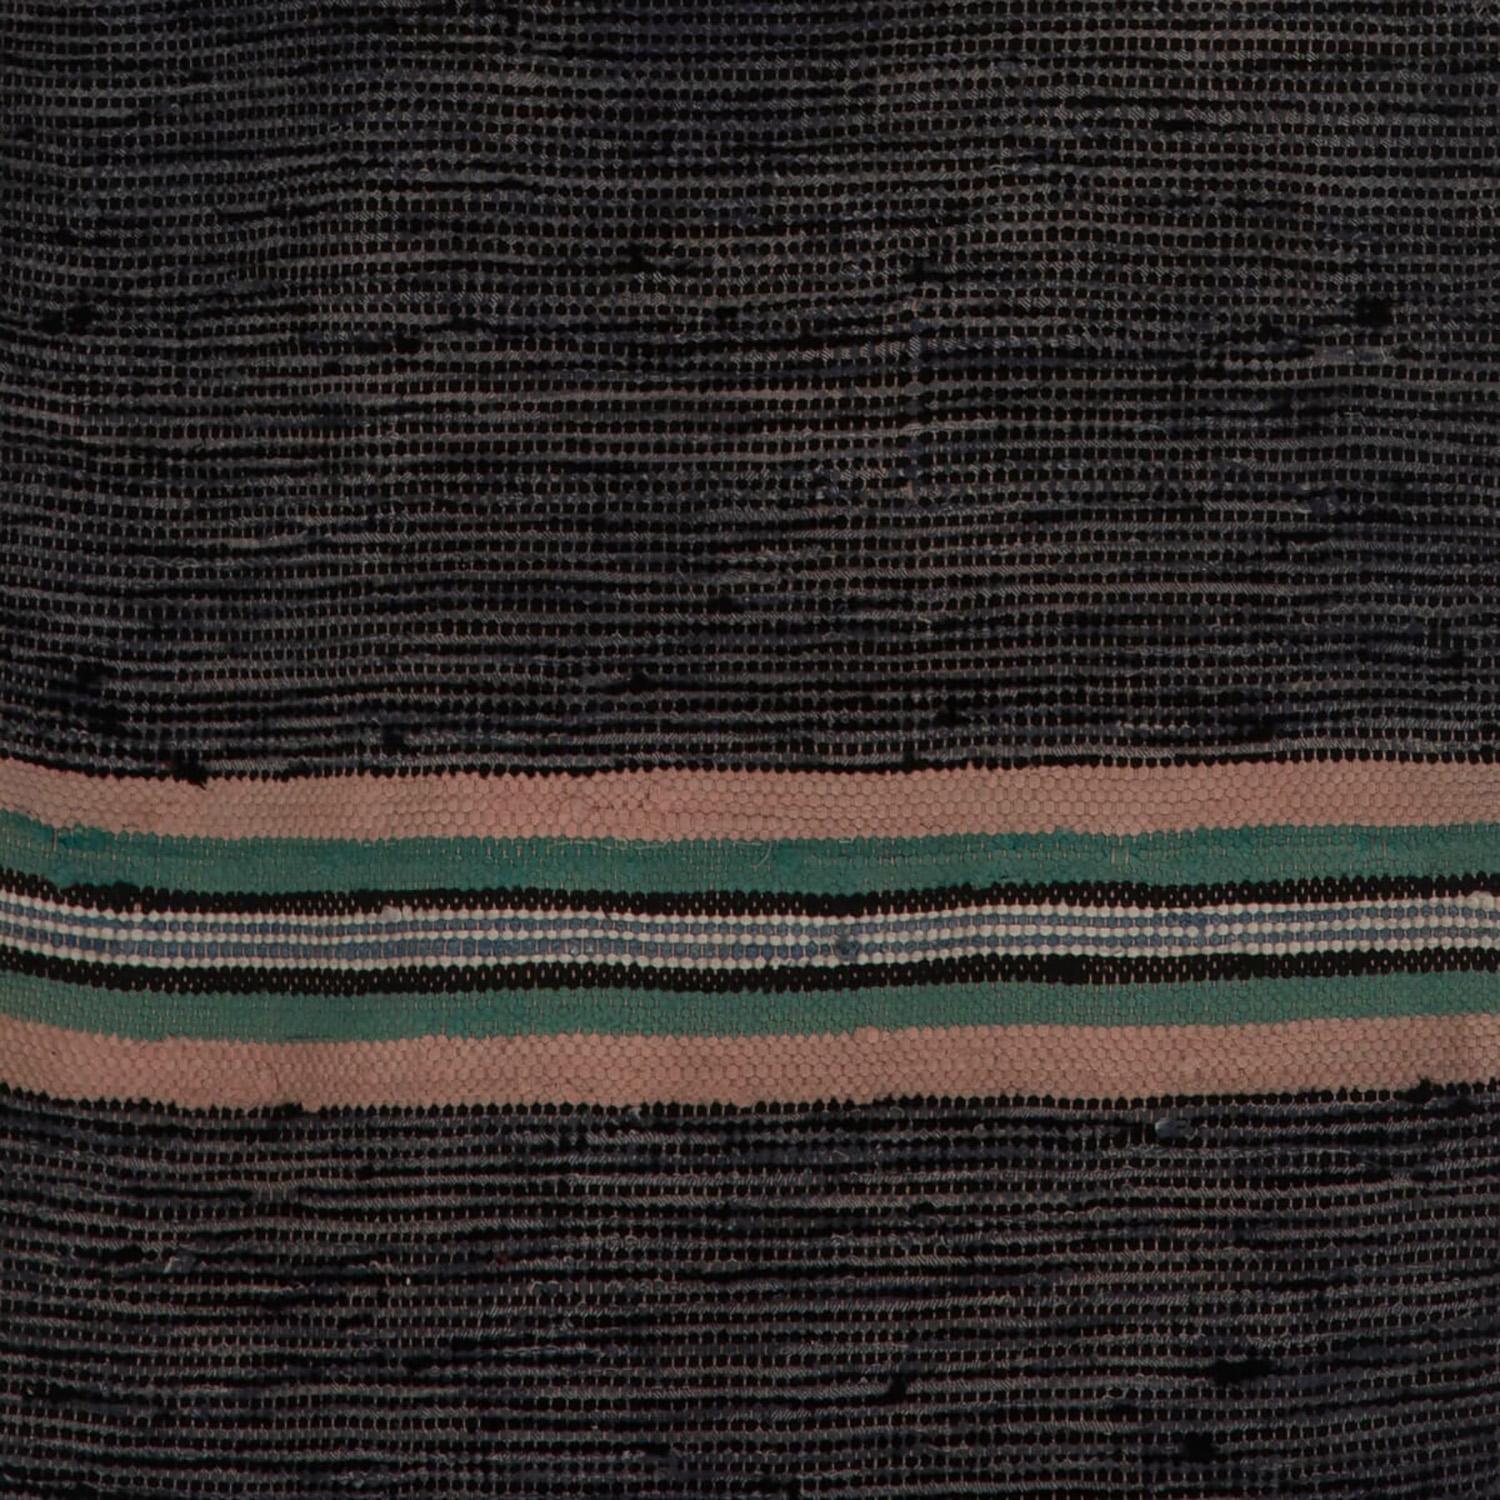 Vintage Swedish rug handwoven in the 1950s, with tones of blue and a green stripe.